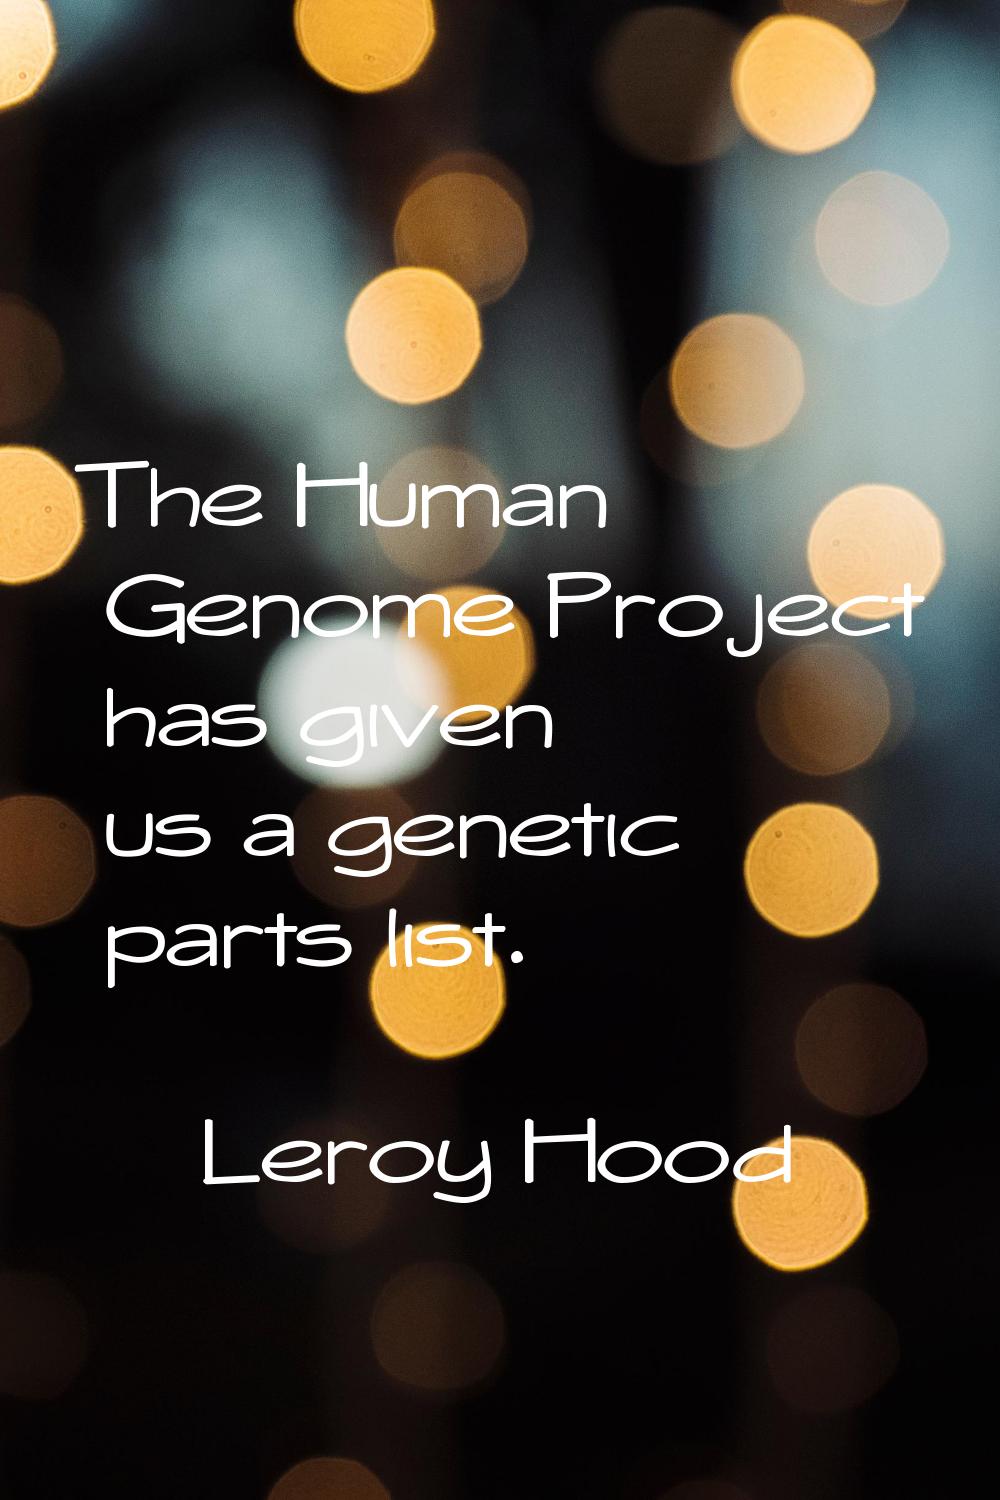 The Human Genome Project has given us a genetic parts list.